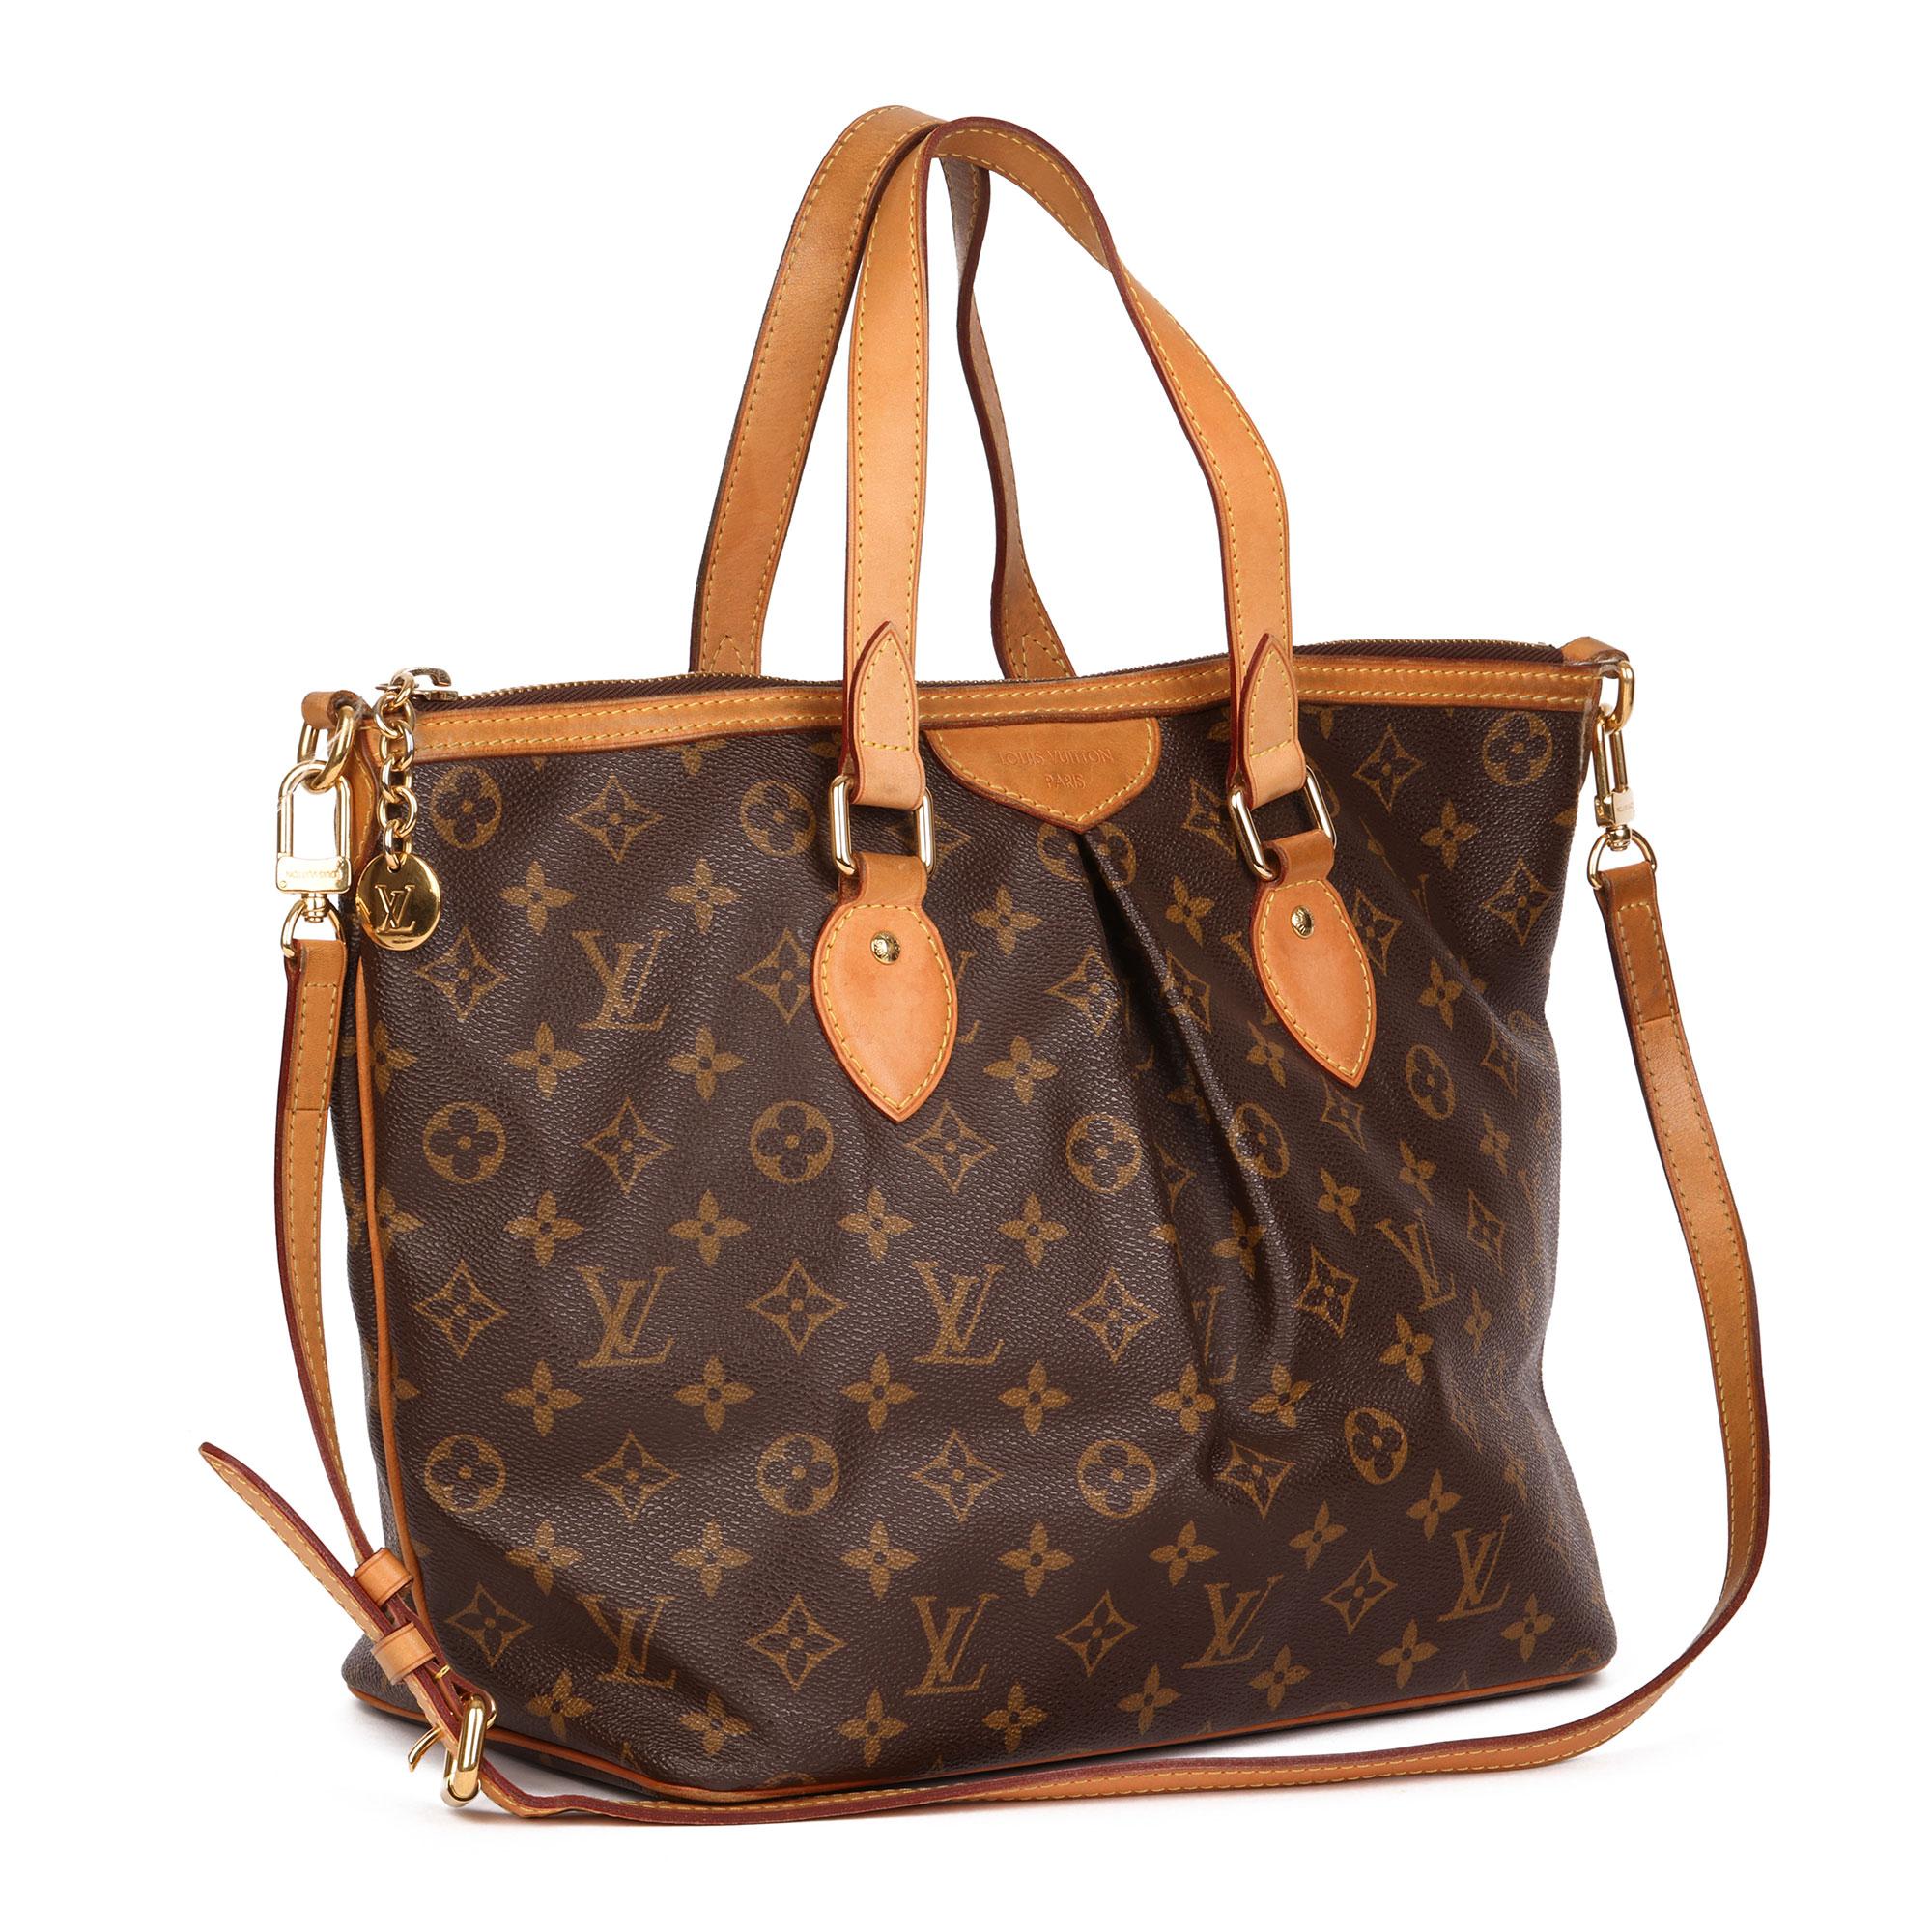 LOUIS VUITTON
Brown Monogram Coated Canvas & Vachetta Leather Palermo PM

Xupes Reference: HB4070
Serial Number: SR0171
Age (Circa): 2011
Accompanied By: louis Vuitton Dust Bag, Shoulder Strap
Authenticity Details: Date Stamp (Made in